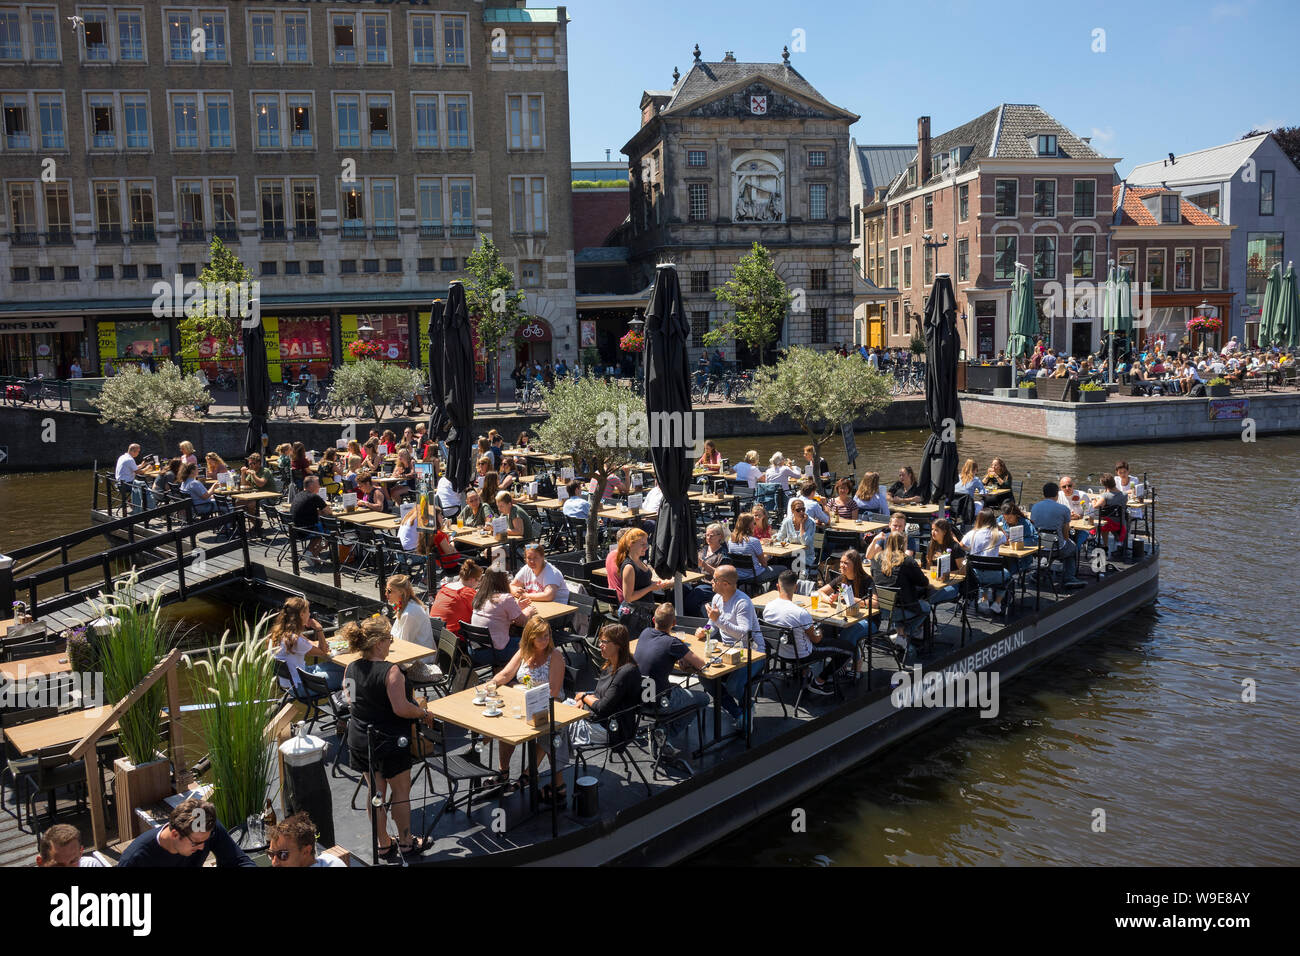 Leiden, Holland - July 05, 2019: Restaurant terrace on boats at the crossing of the Oude and Nieuwe Rijn opposite the Weigh House Stock Photo